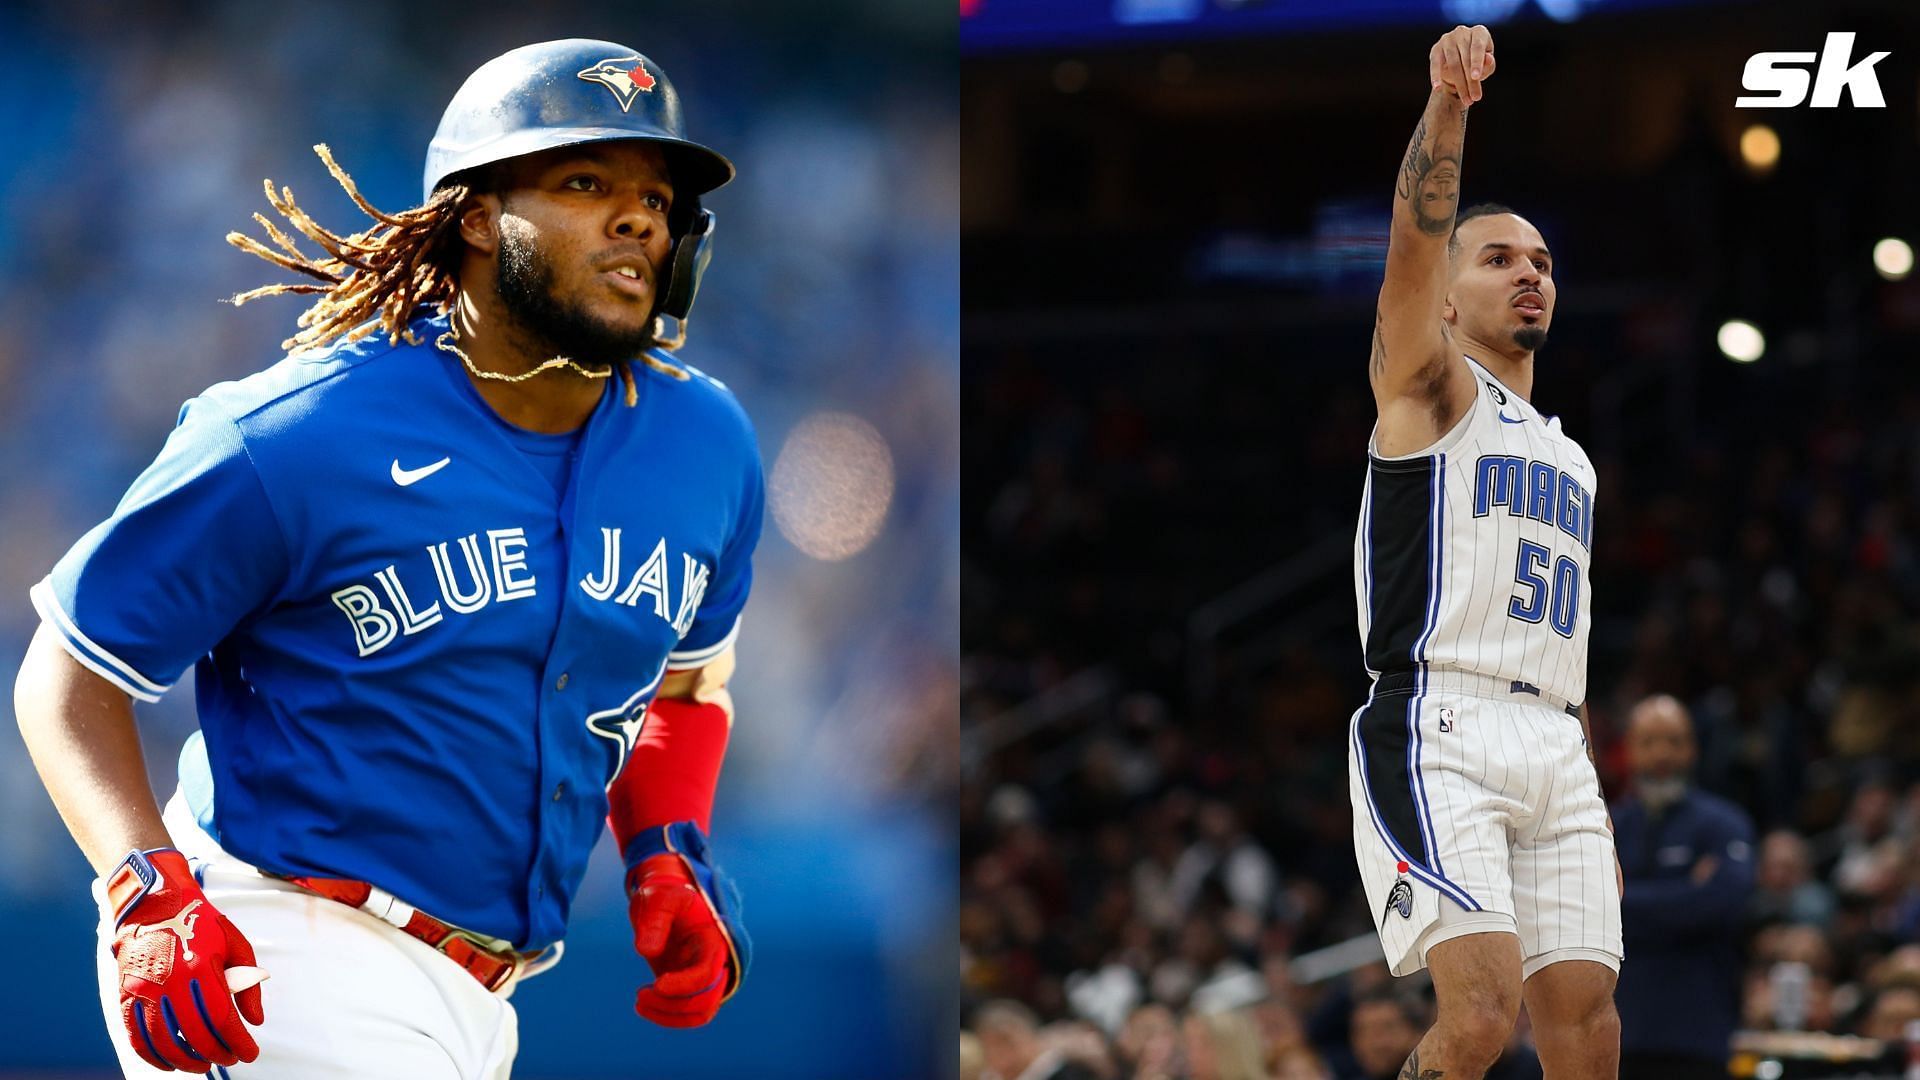 A jersey swap between Vladimir Guerrero Jr. and Cole Anthony has fans fired up